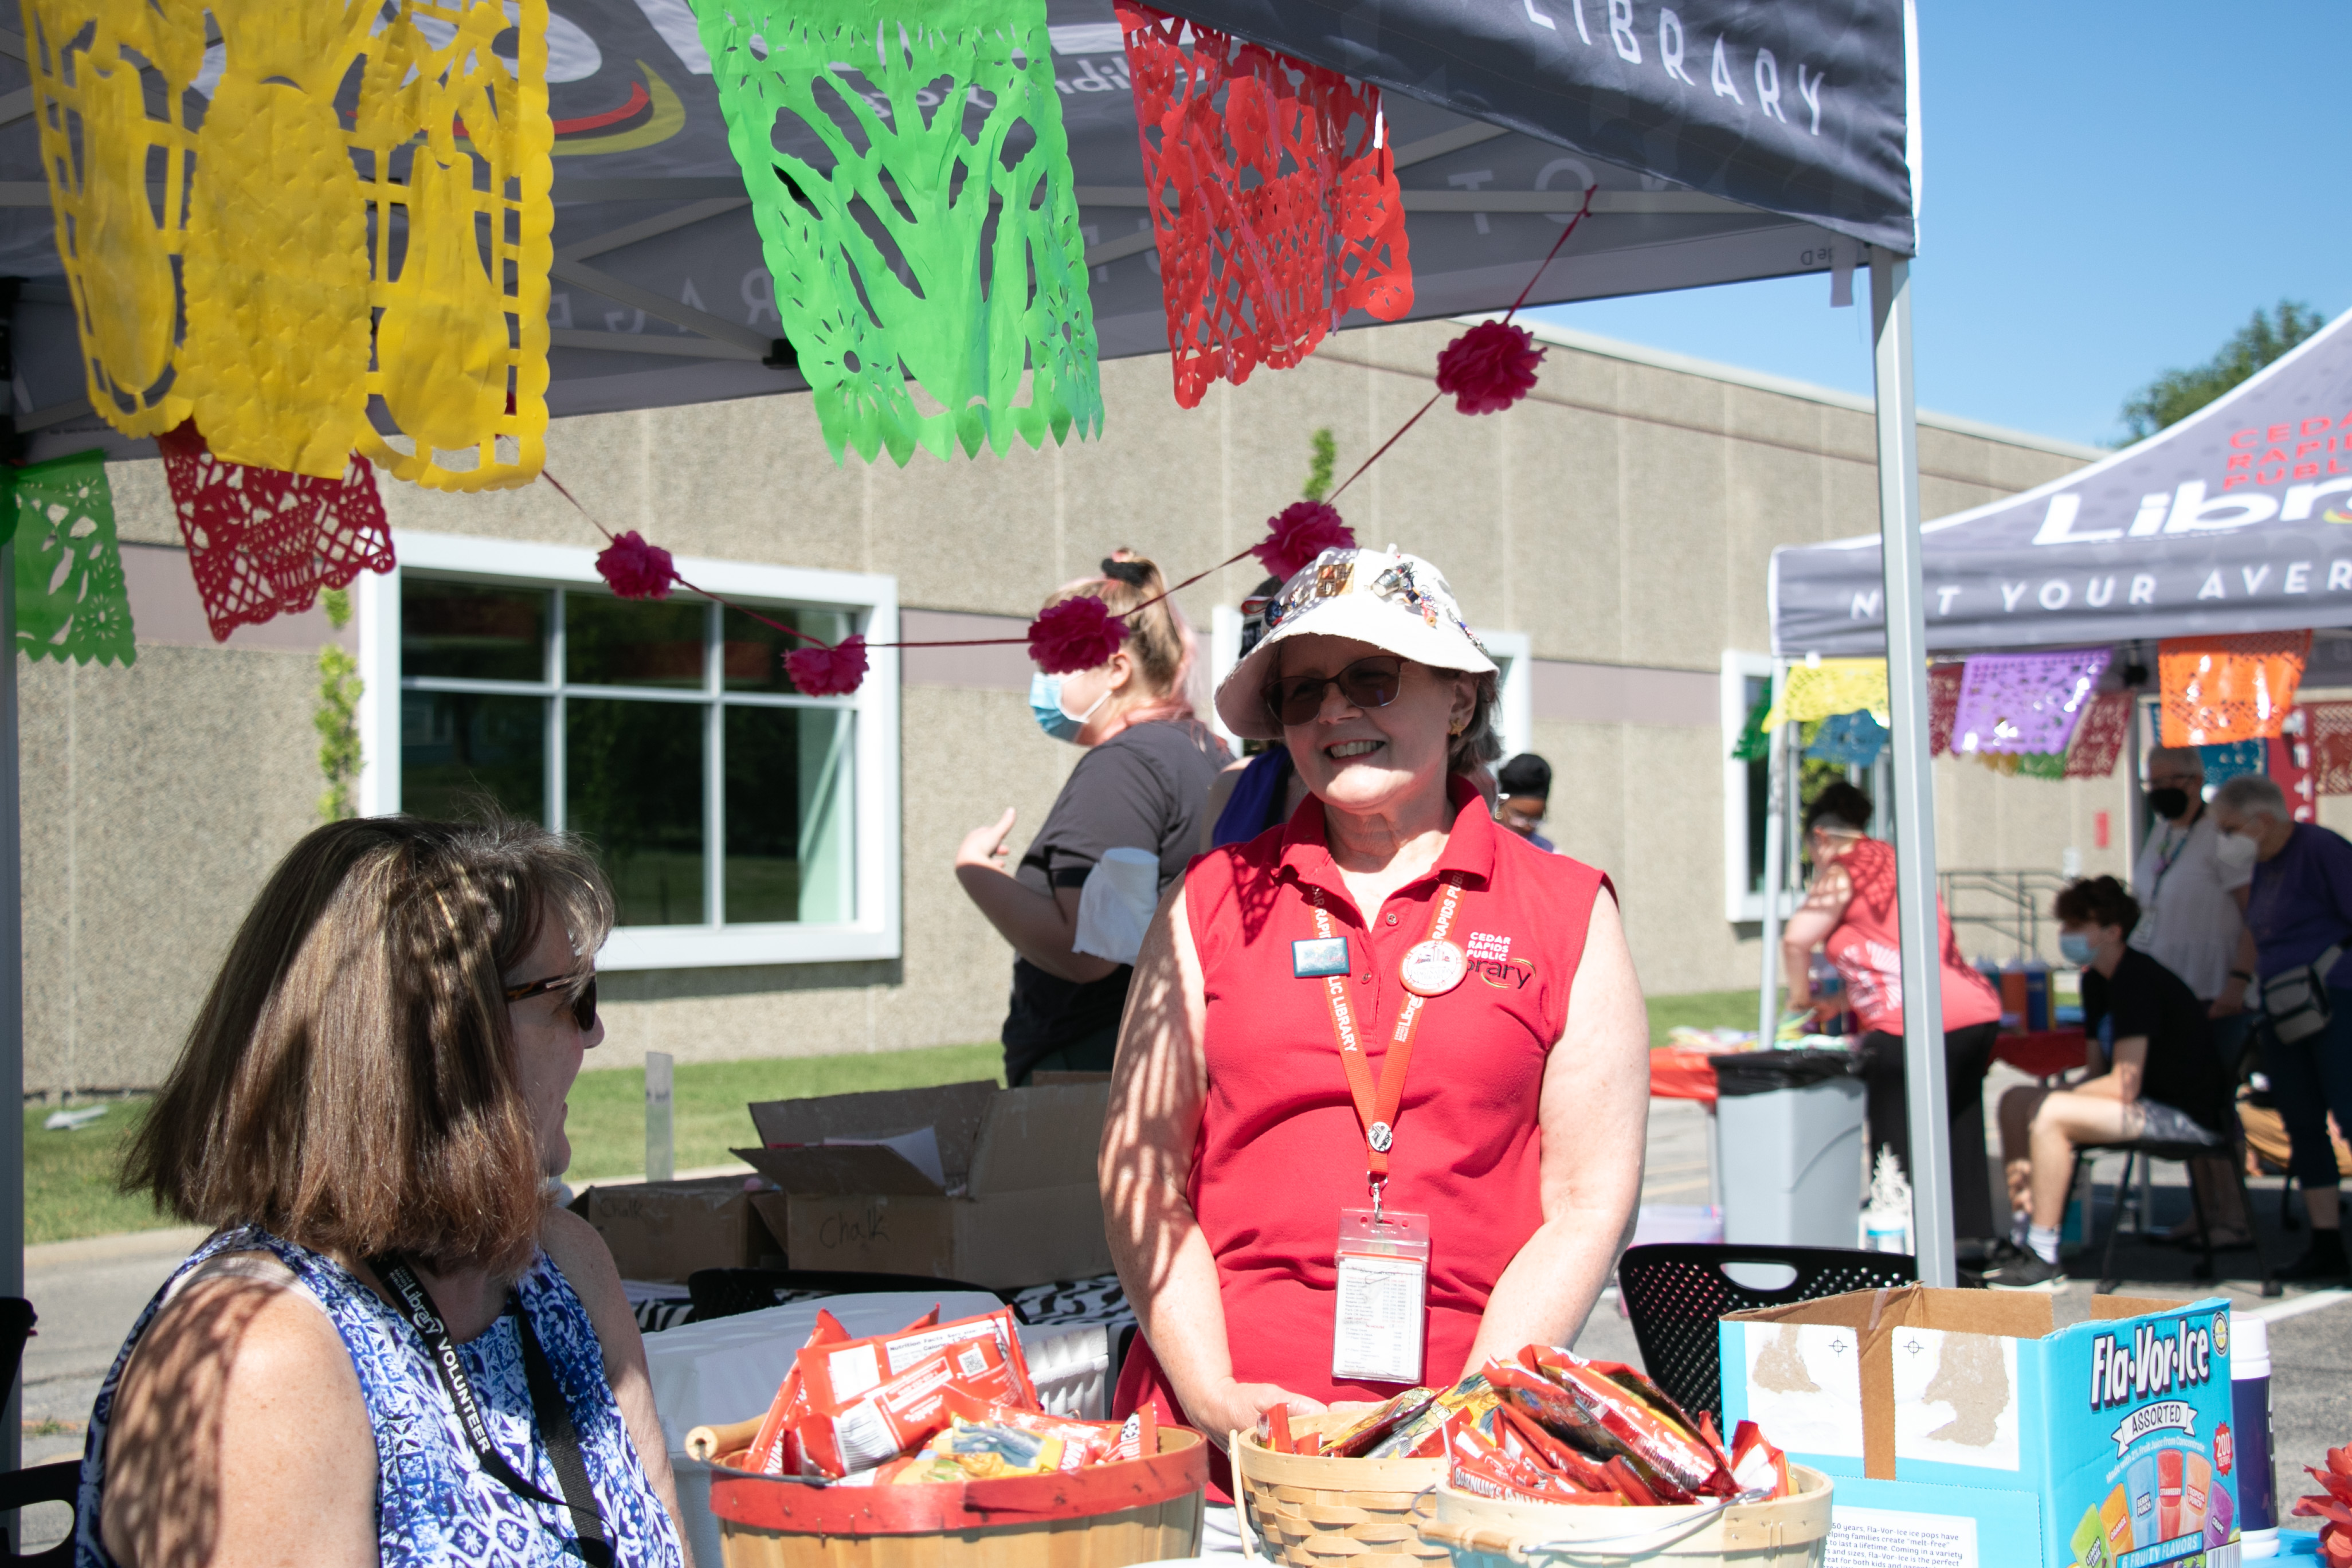 A woman in a red shirt smiles under a library tent on a sunny day.